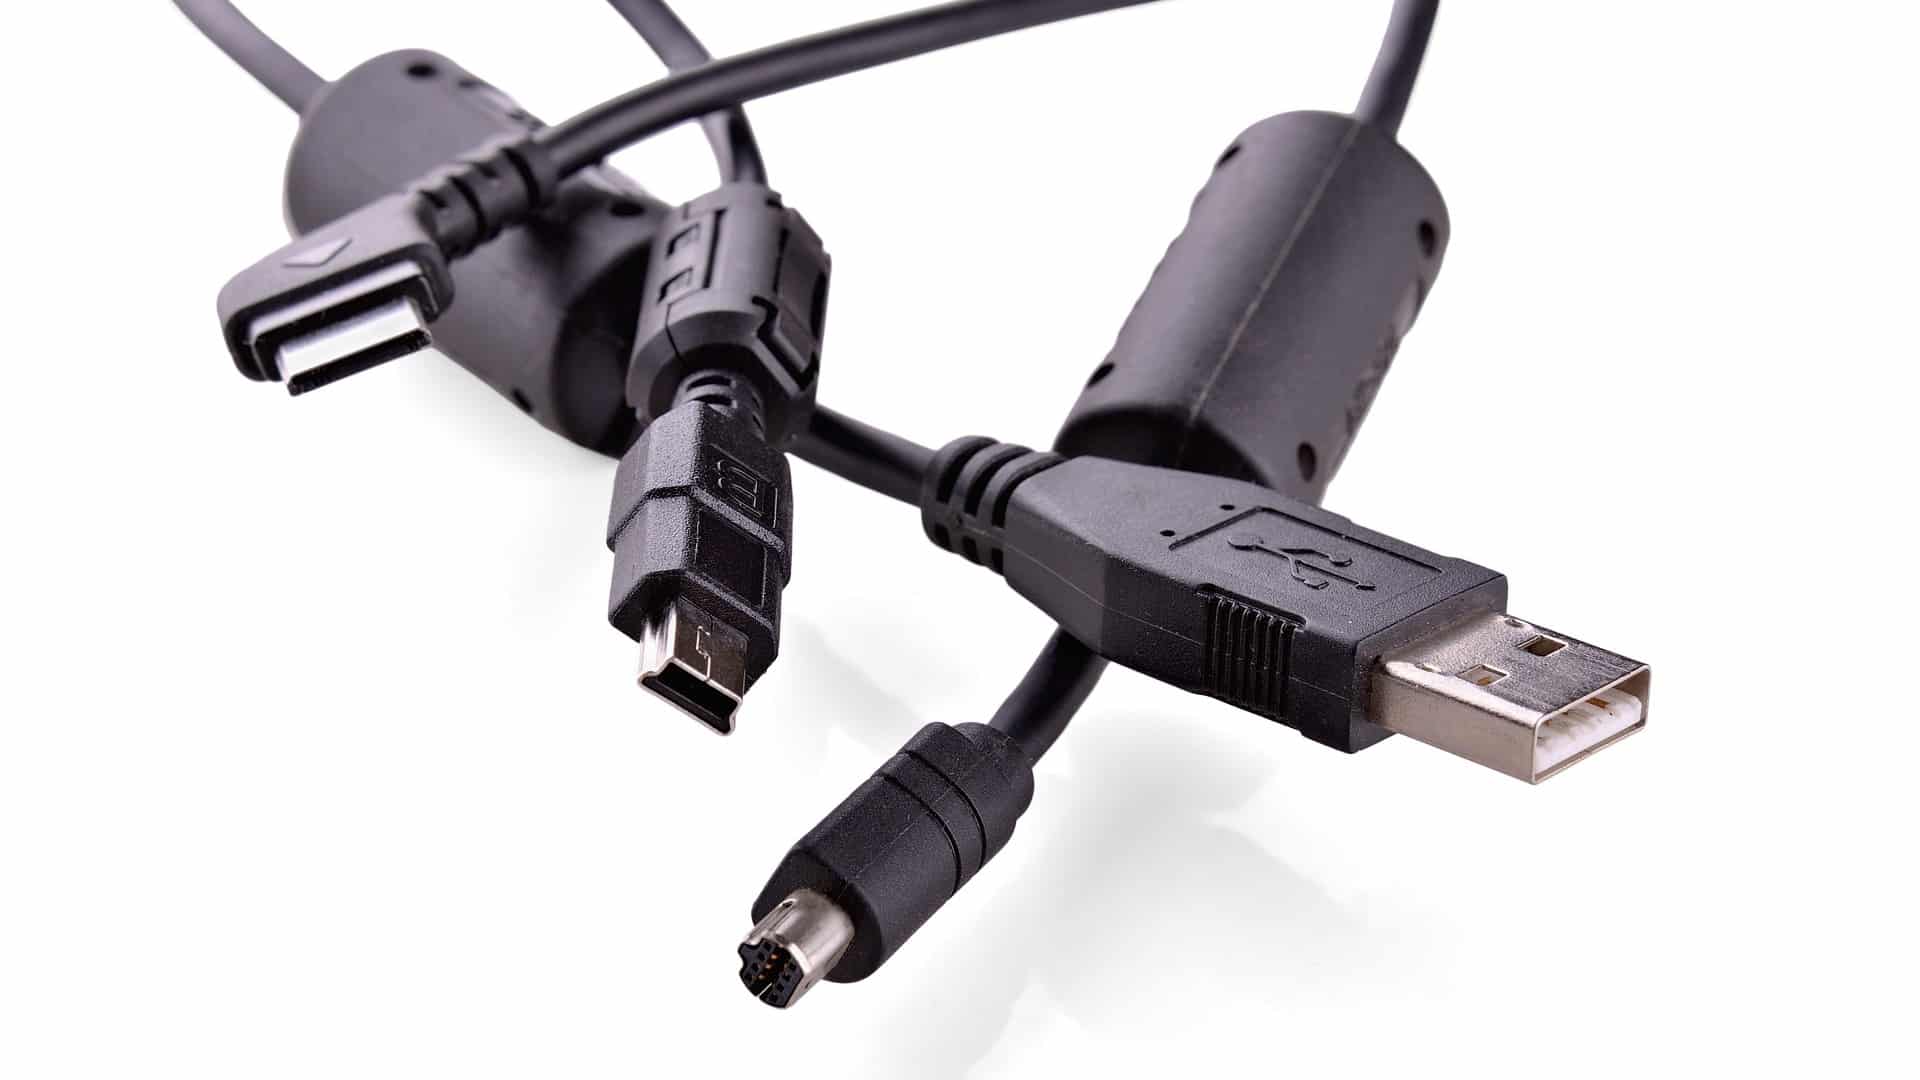 (Don't worry: USB 4 version 2.0 will not add to the already numerous different USB connectors.)